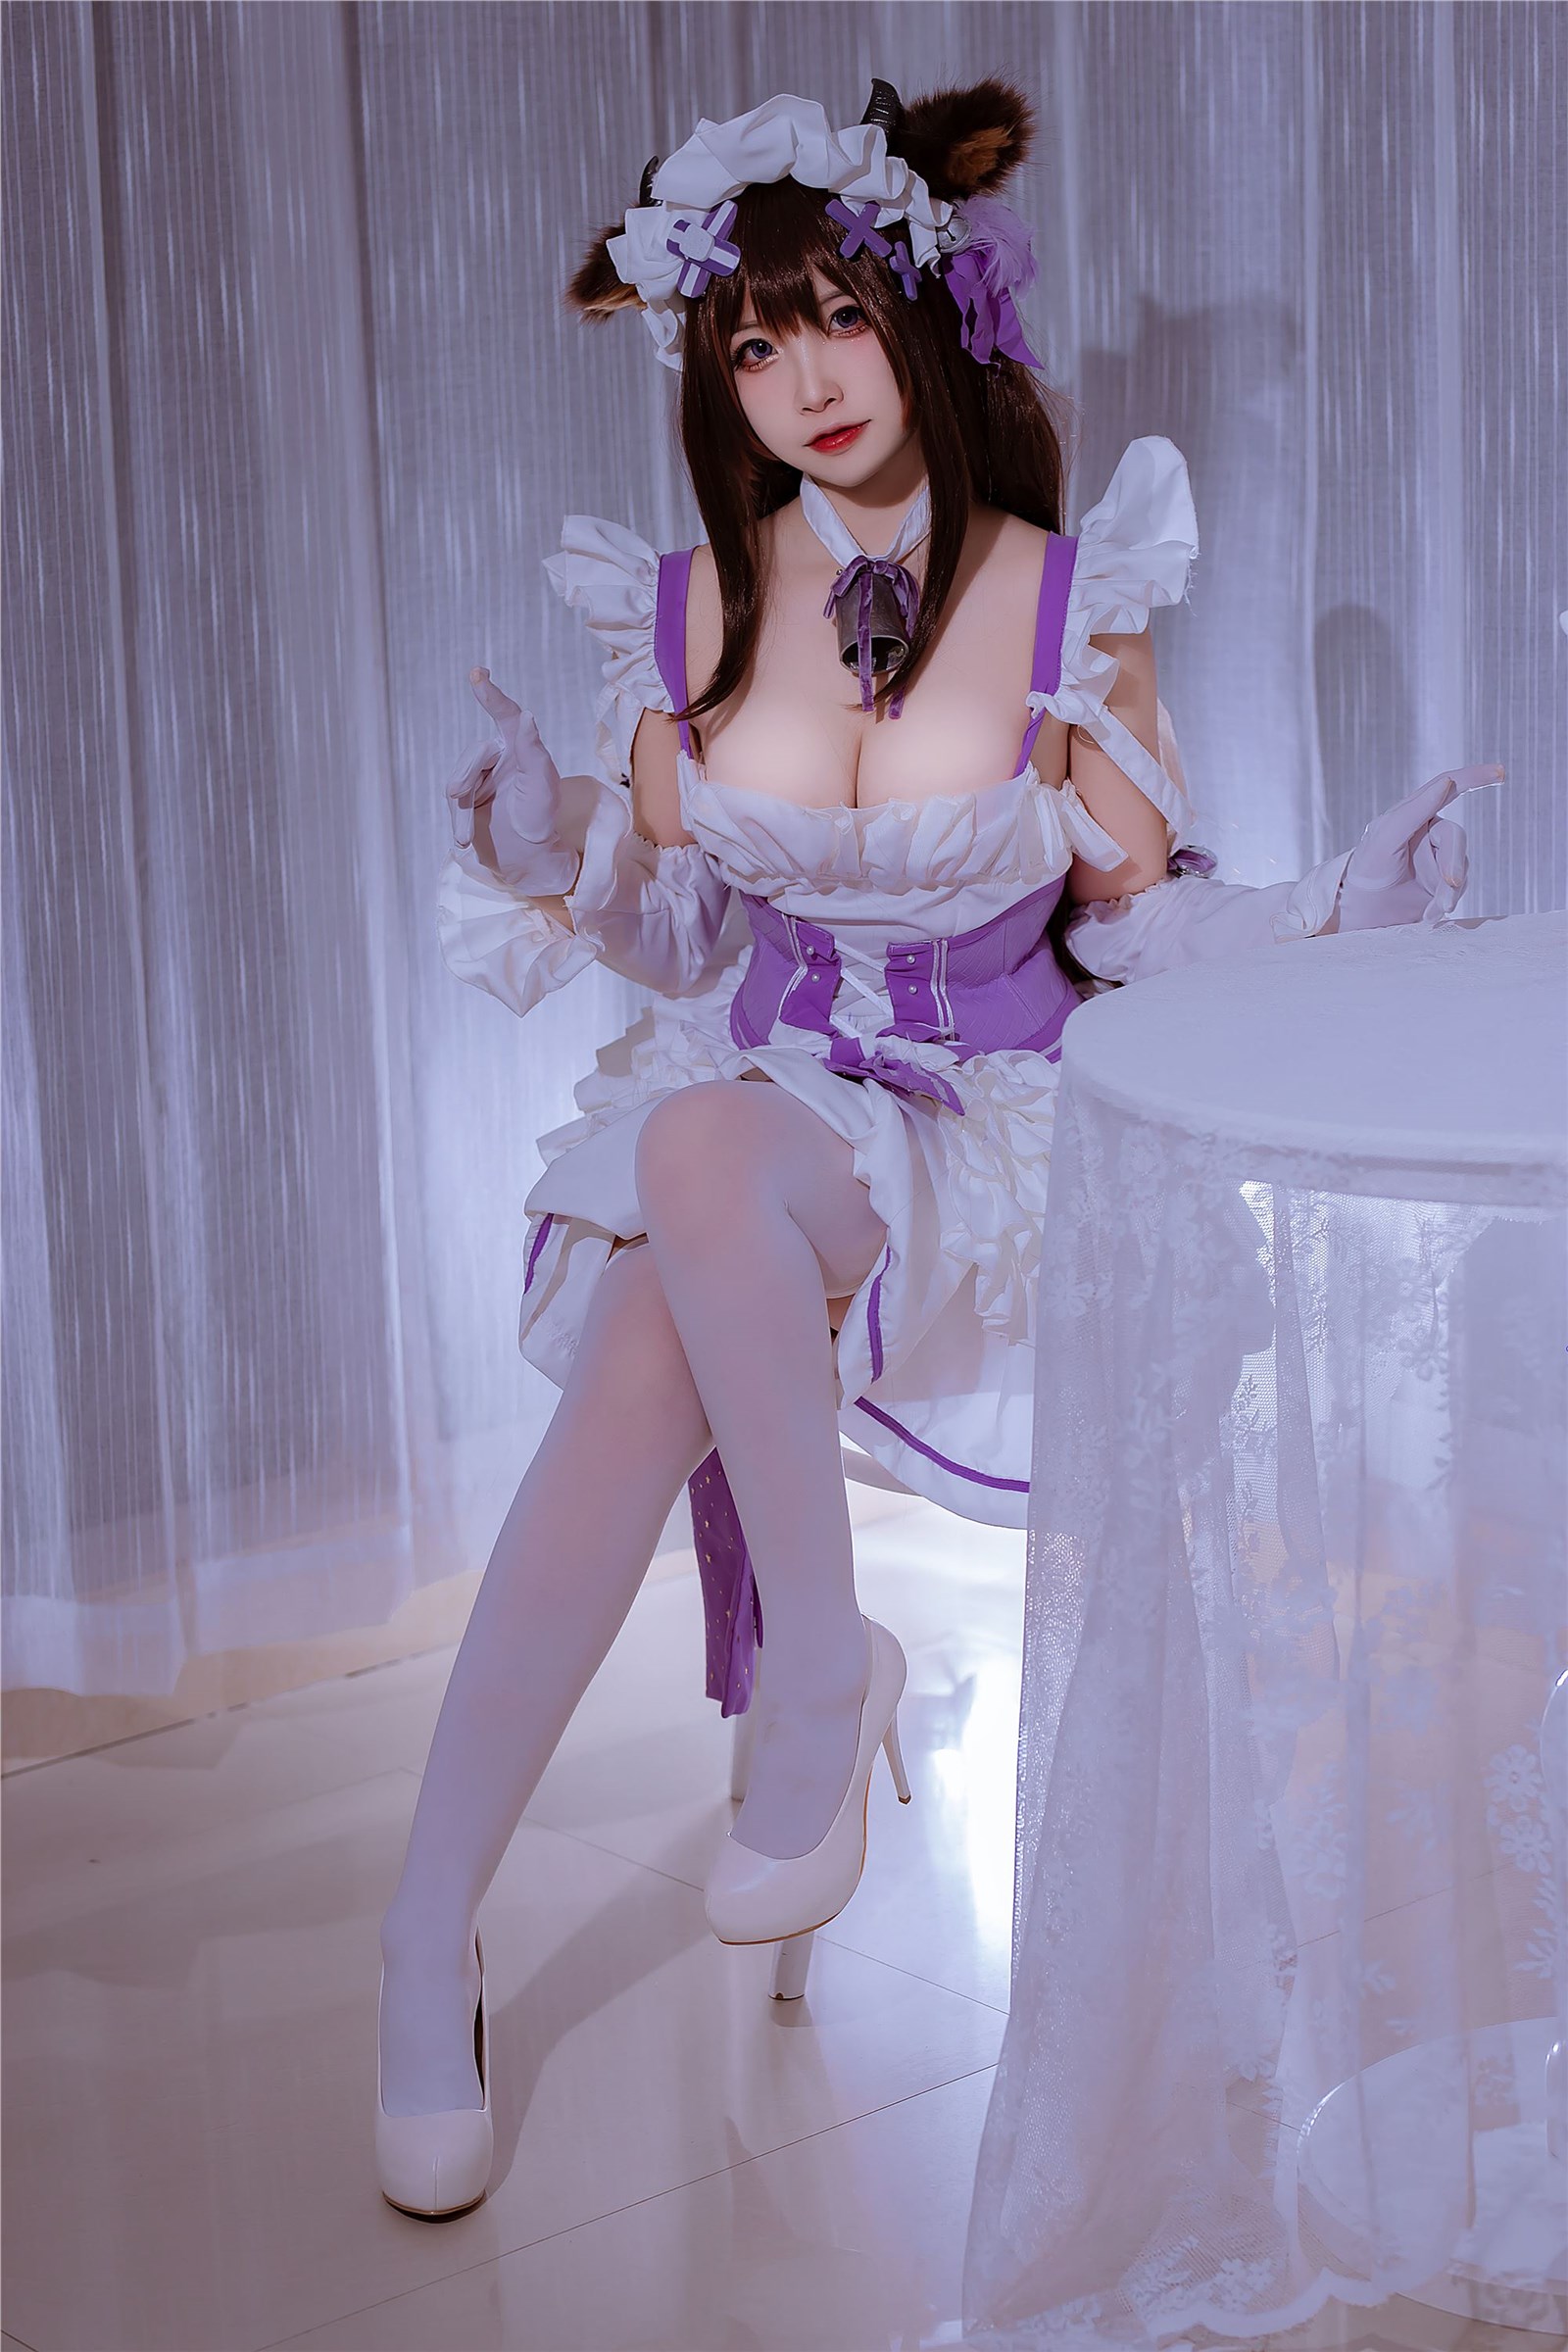 Nisa Nisa, a maid from the same family as Blue Jayano(19)